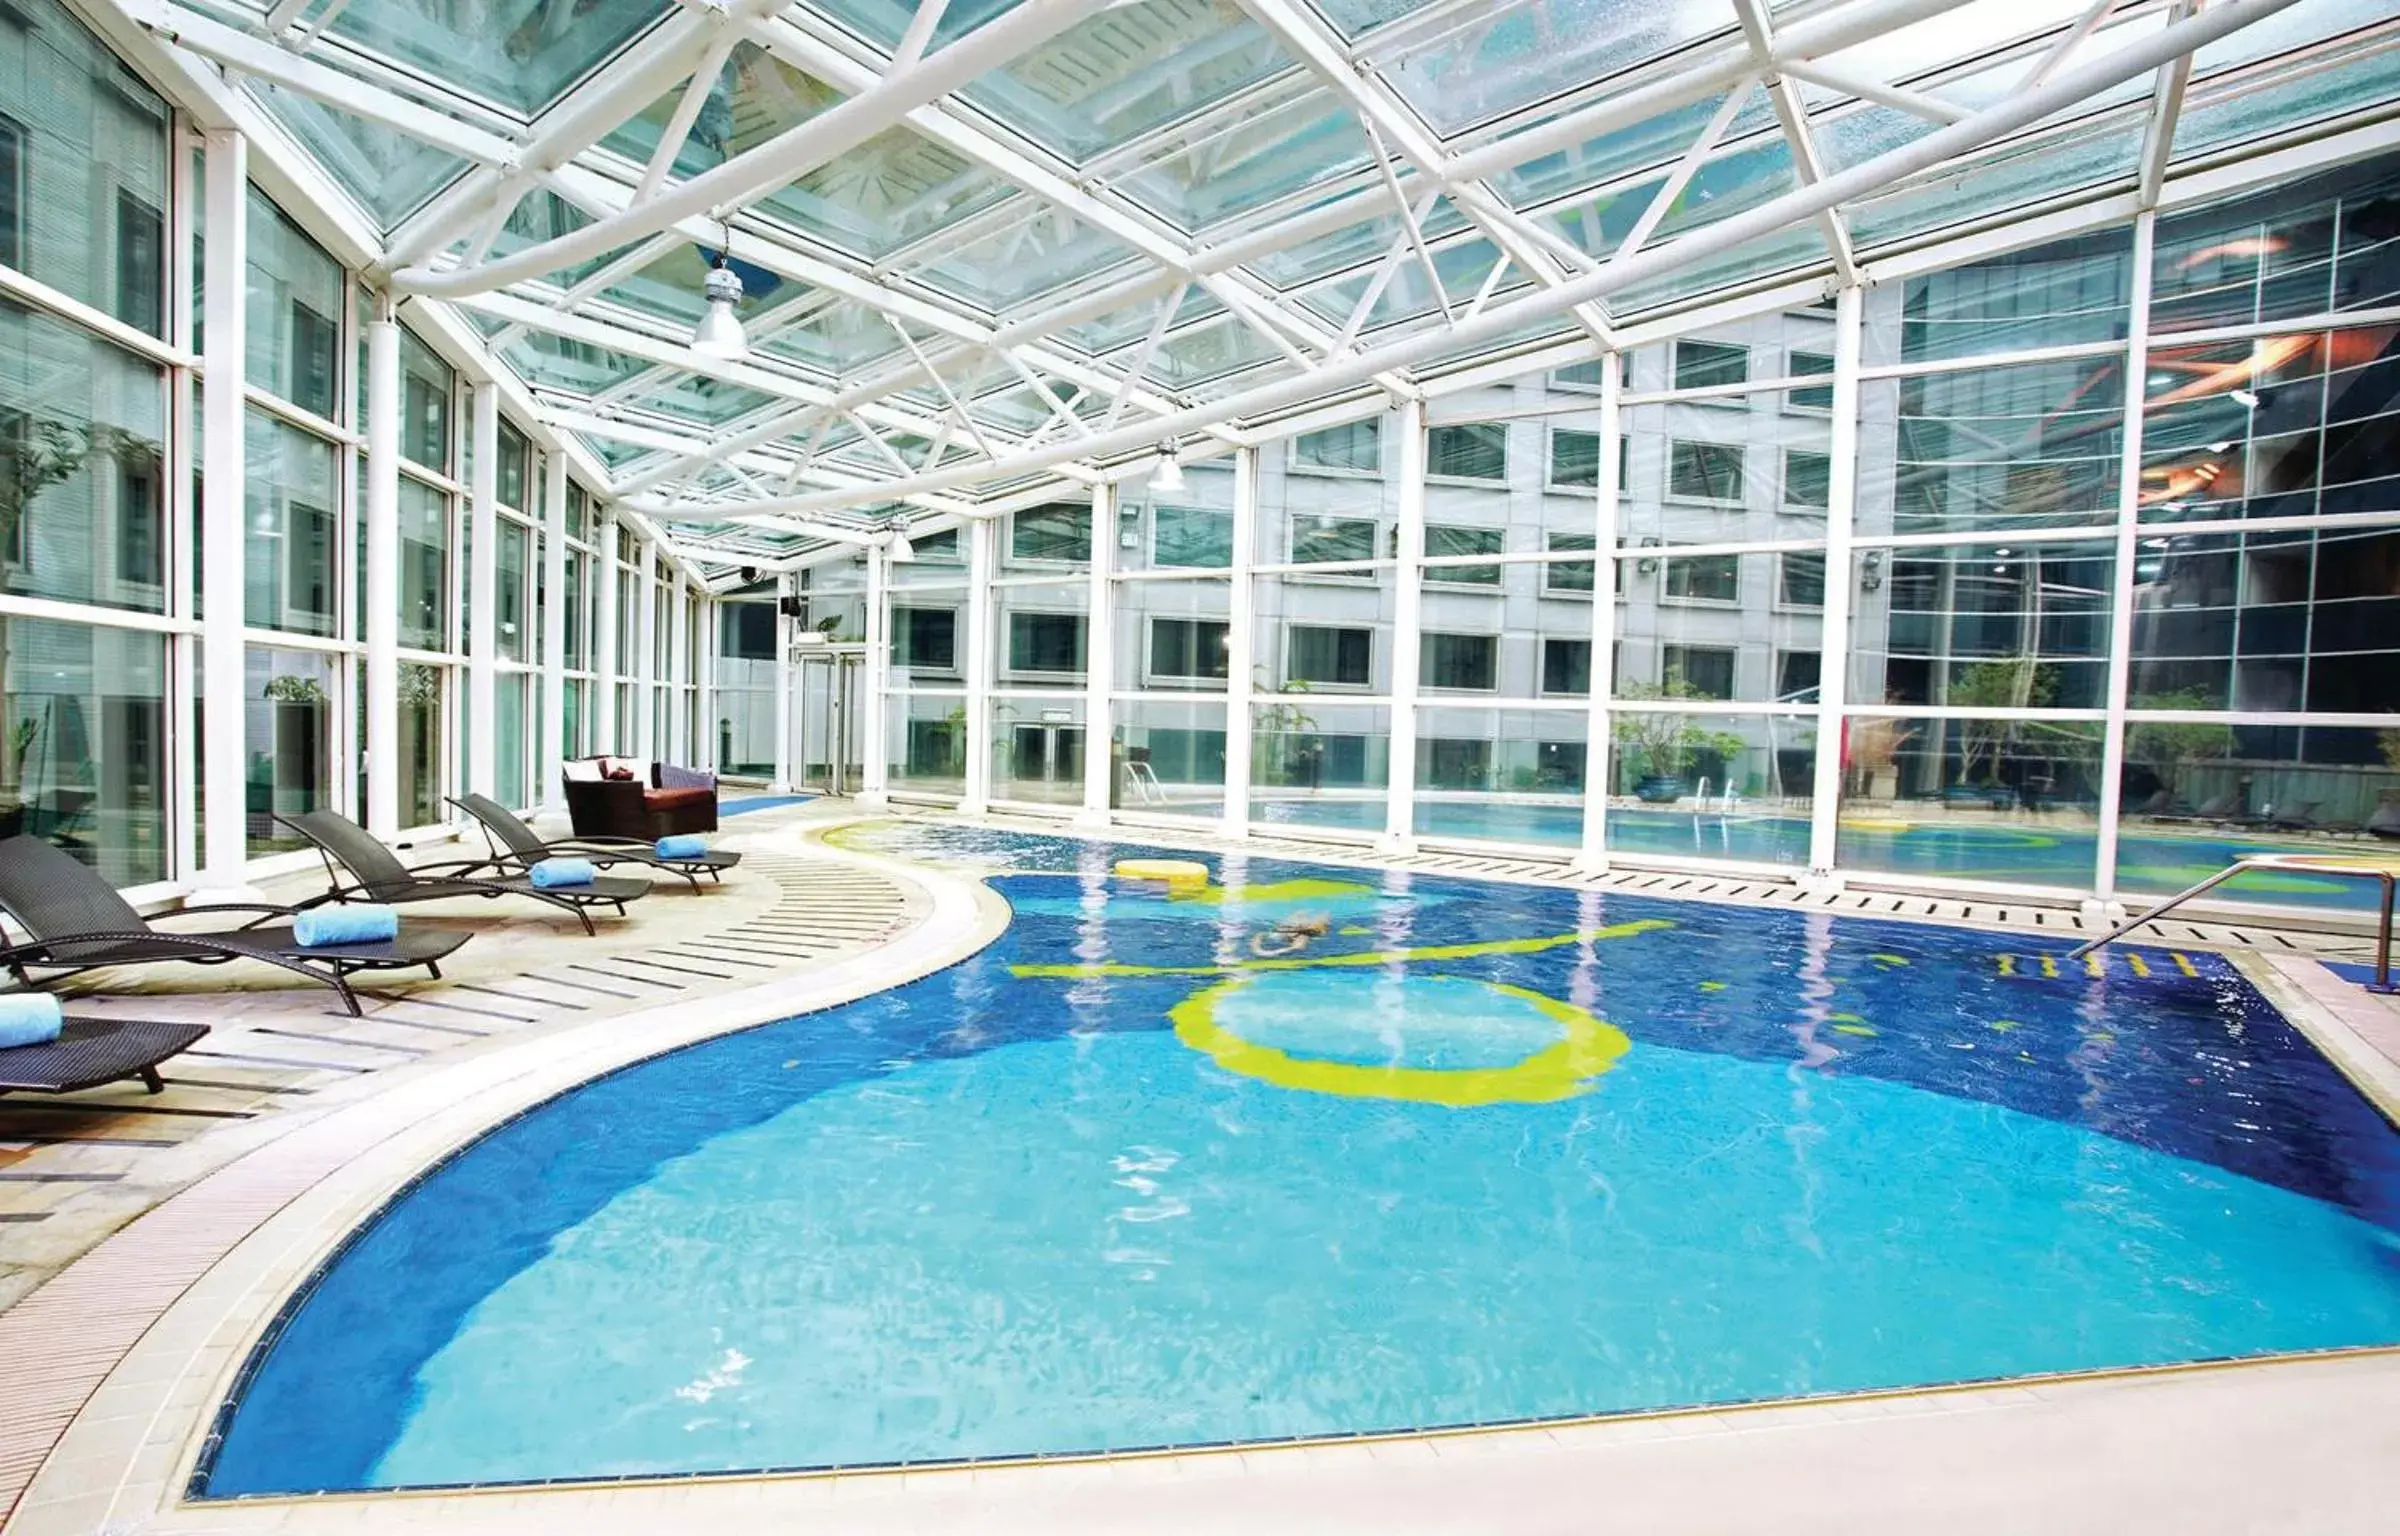 On site, Swimming Pool in Regal Airport Hotel